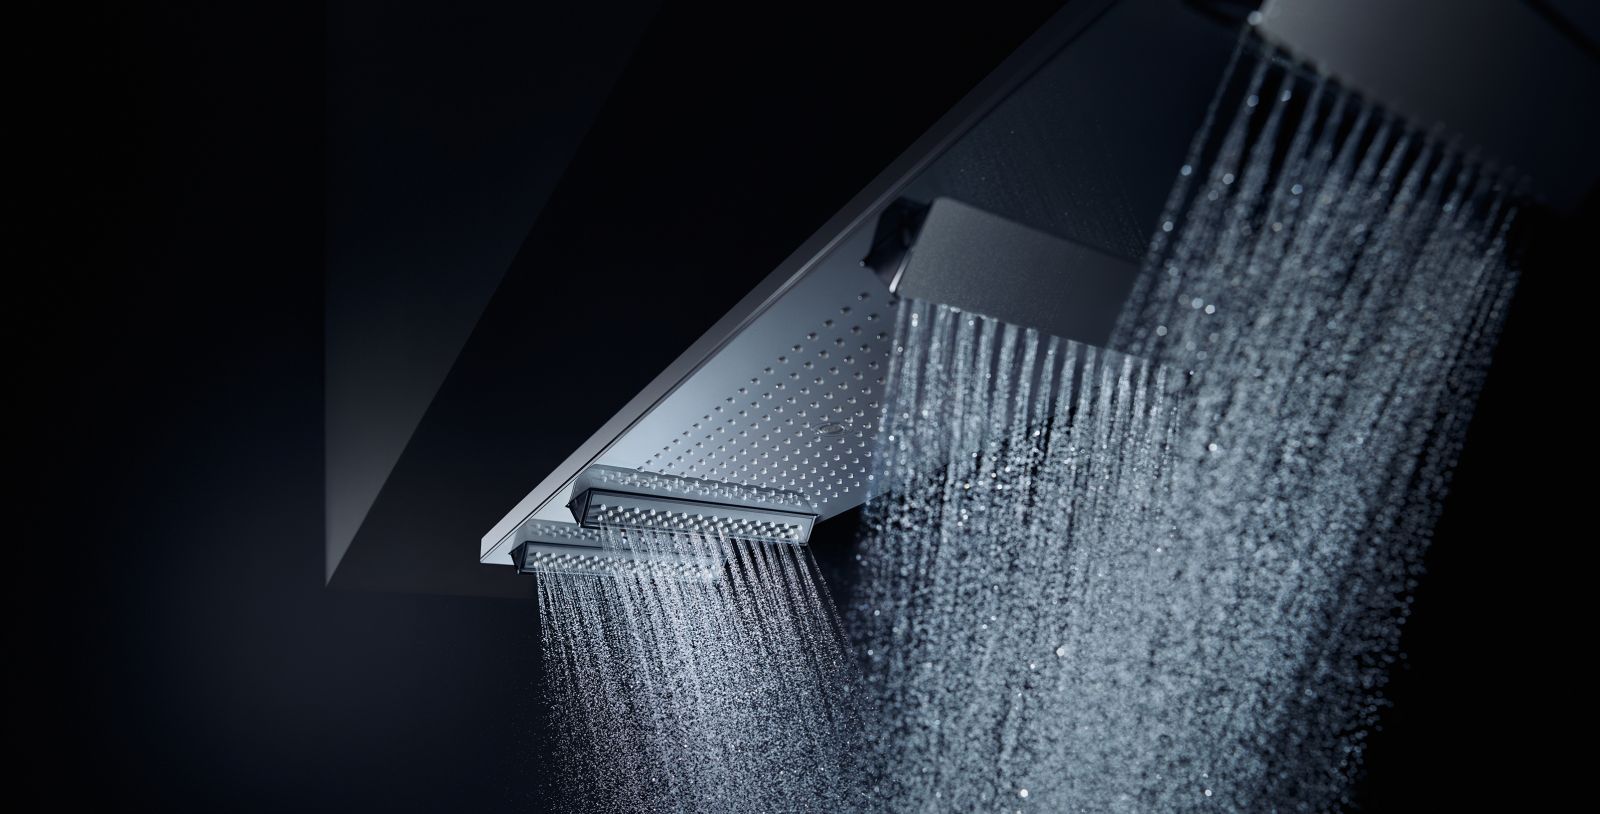 Large rectangular shower head from which water comes